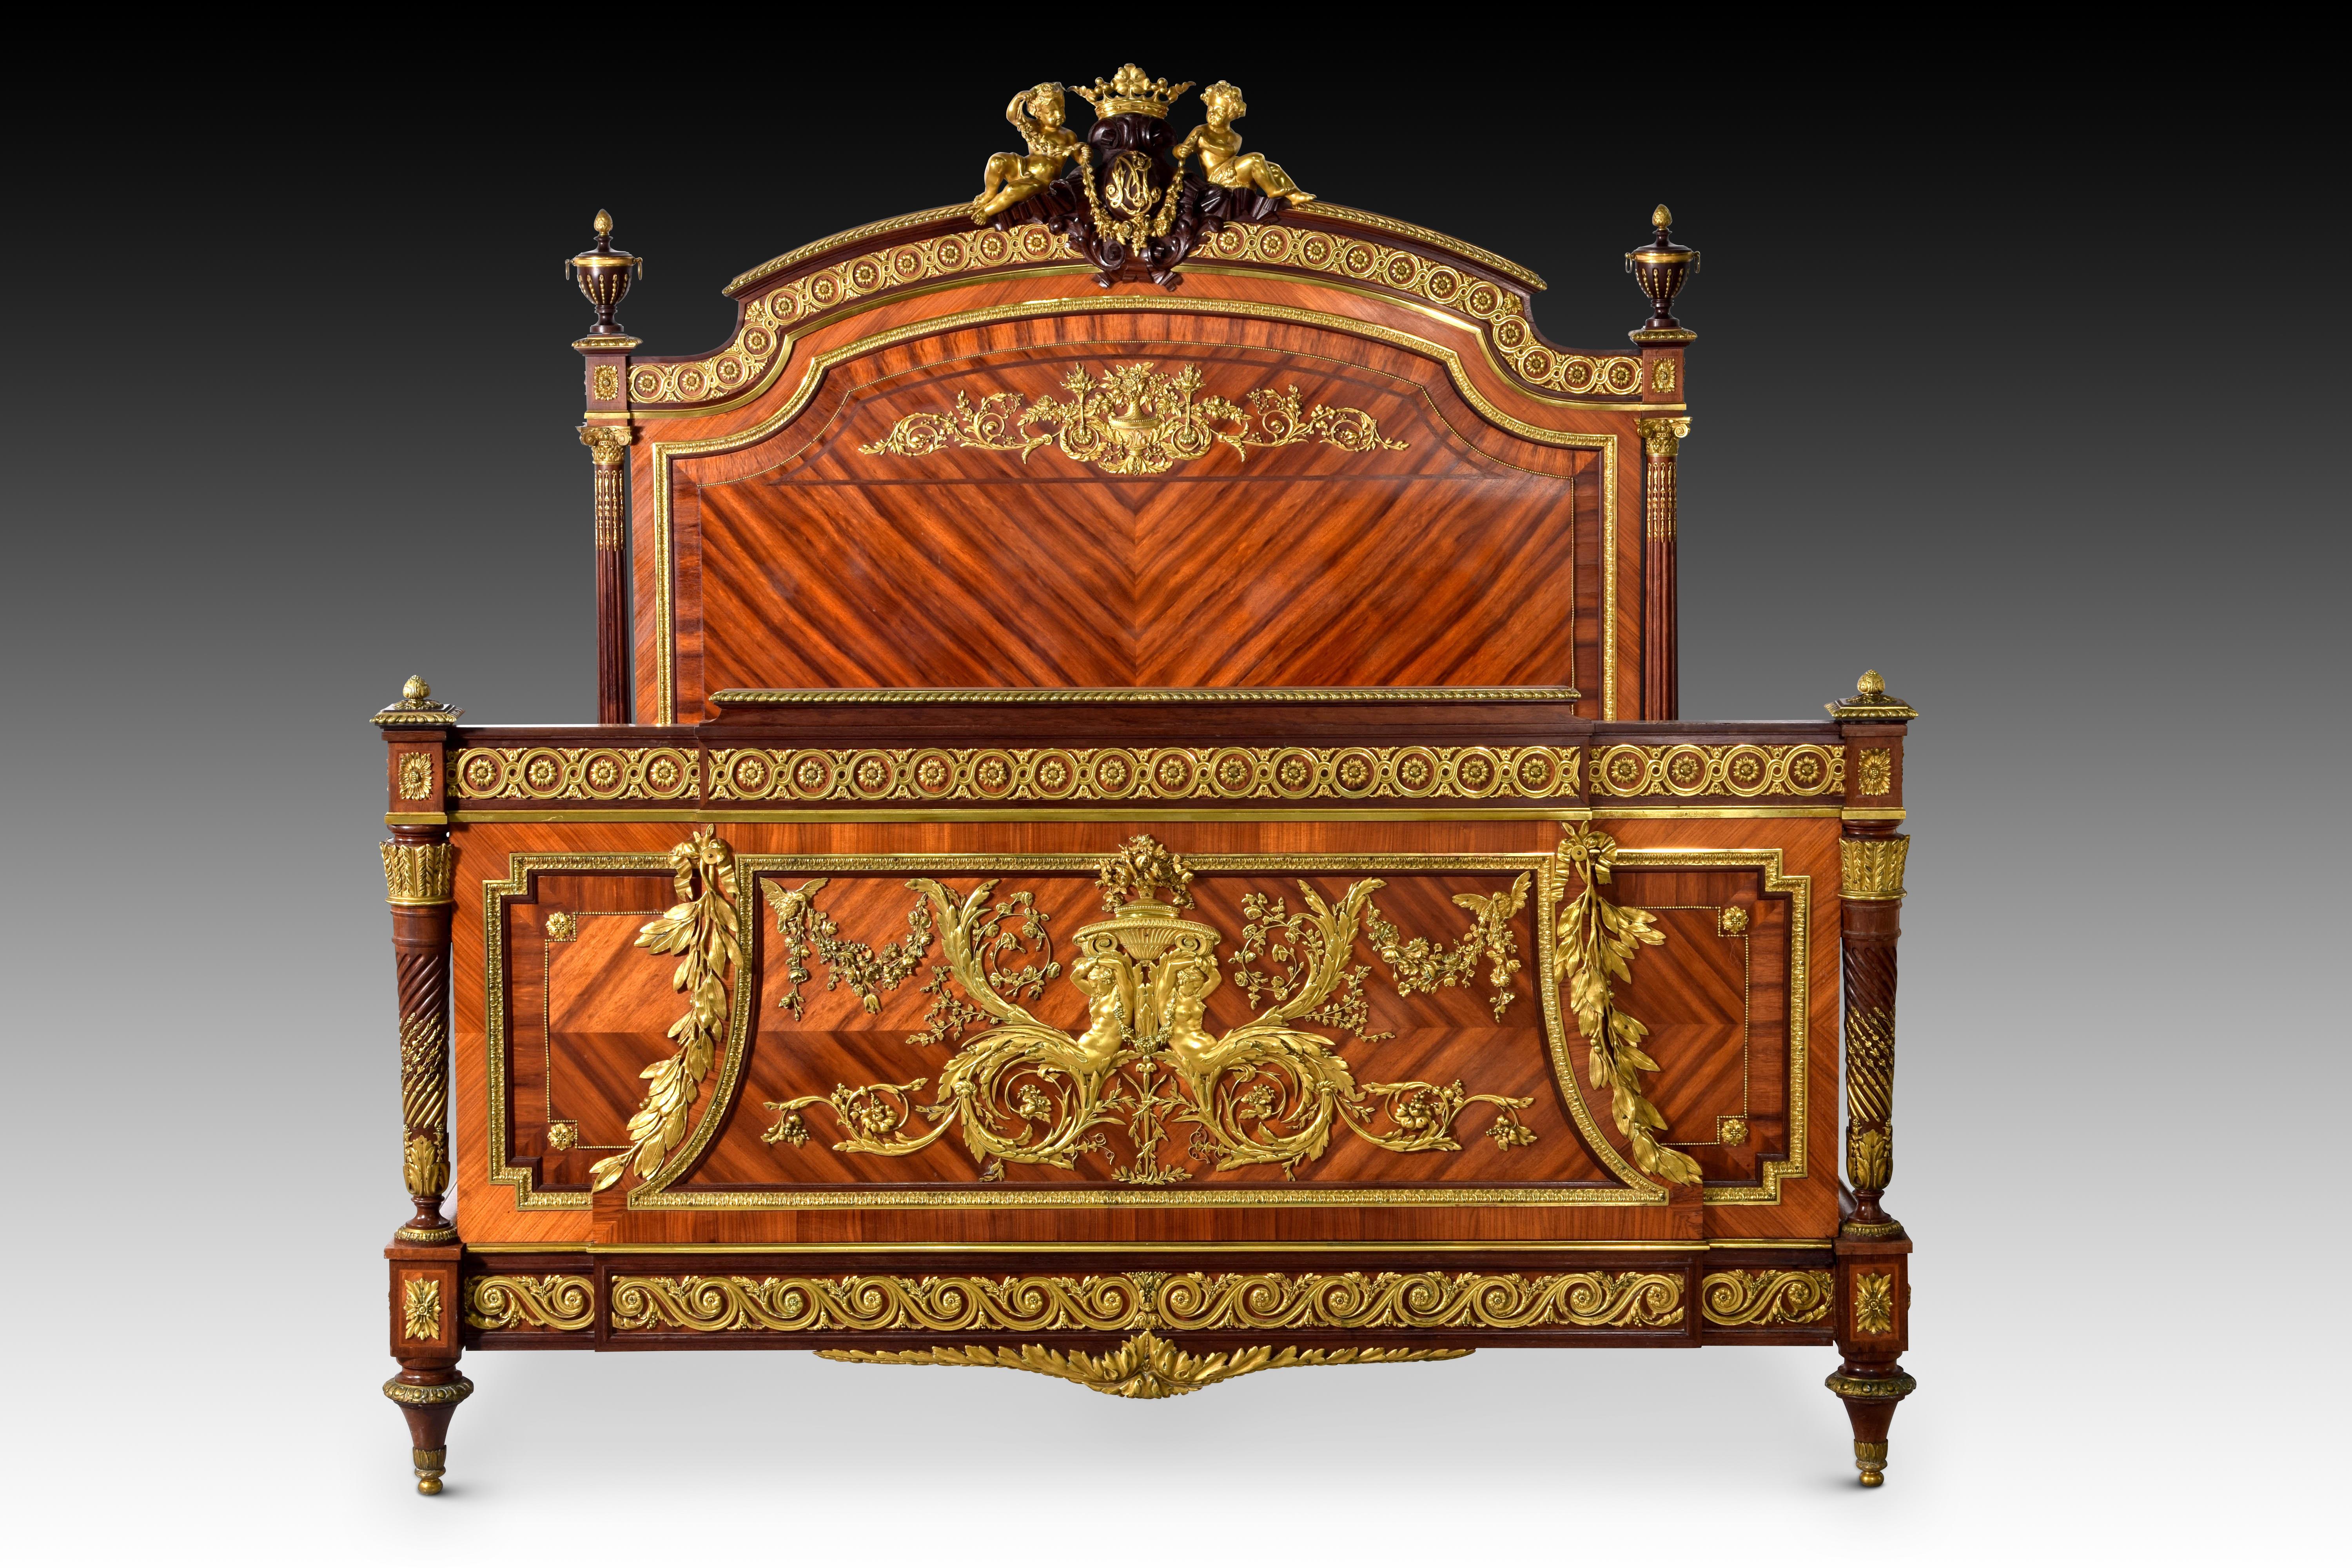 Bed. Wood (mahogany and rosewood), gilded bronze, metal. QUIGNON FILS. Paris, France, towards the last third of the 19th century. 
Signed on frame.
 Bed frame with four legs made of different woods, among which mahogany stands out, and decorated